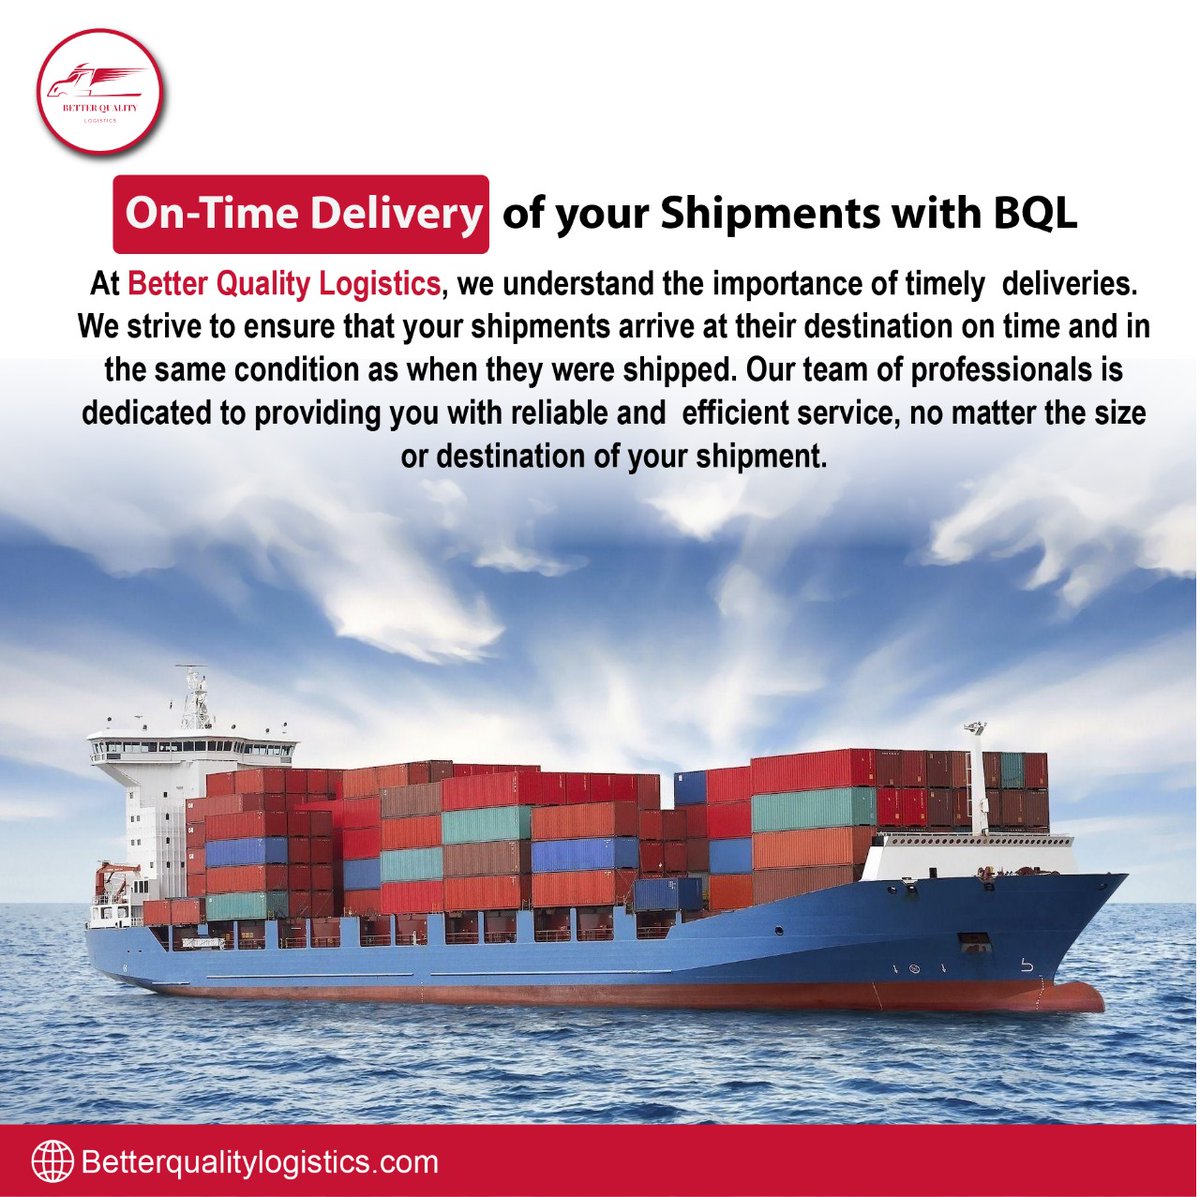 🚚🌟 Experience OnTime Delivery with BQL - Better Quality Logistics! 🌟🚚

🔹 Fast & Reliable Service
🔹 Precision & Care in Handling
🔹 Nationwide & International Delivery

Let us take your logistics worries away. Connect with us today 

betterqualitylogistics.com

#BQLLogistics